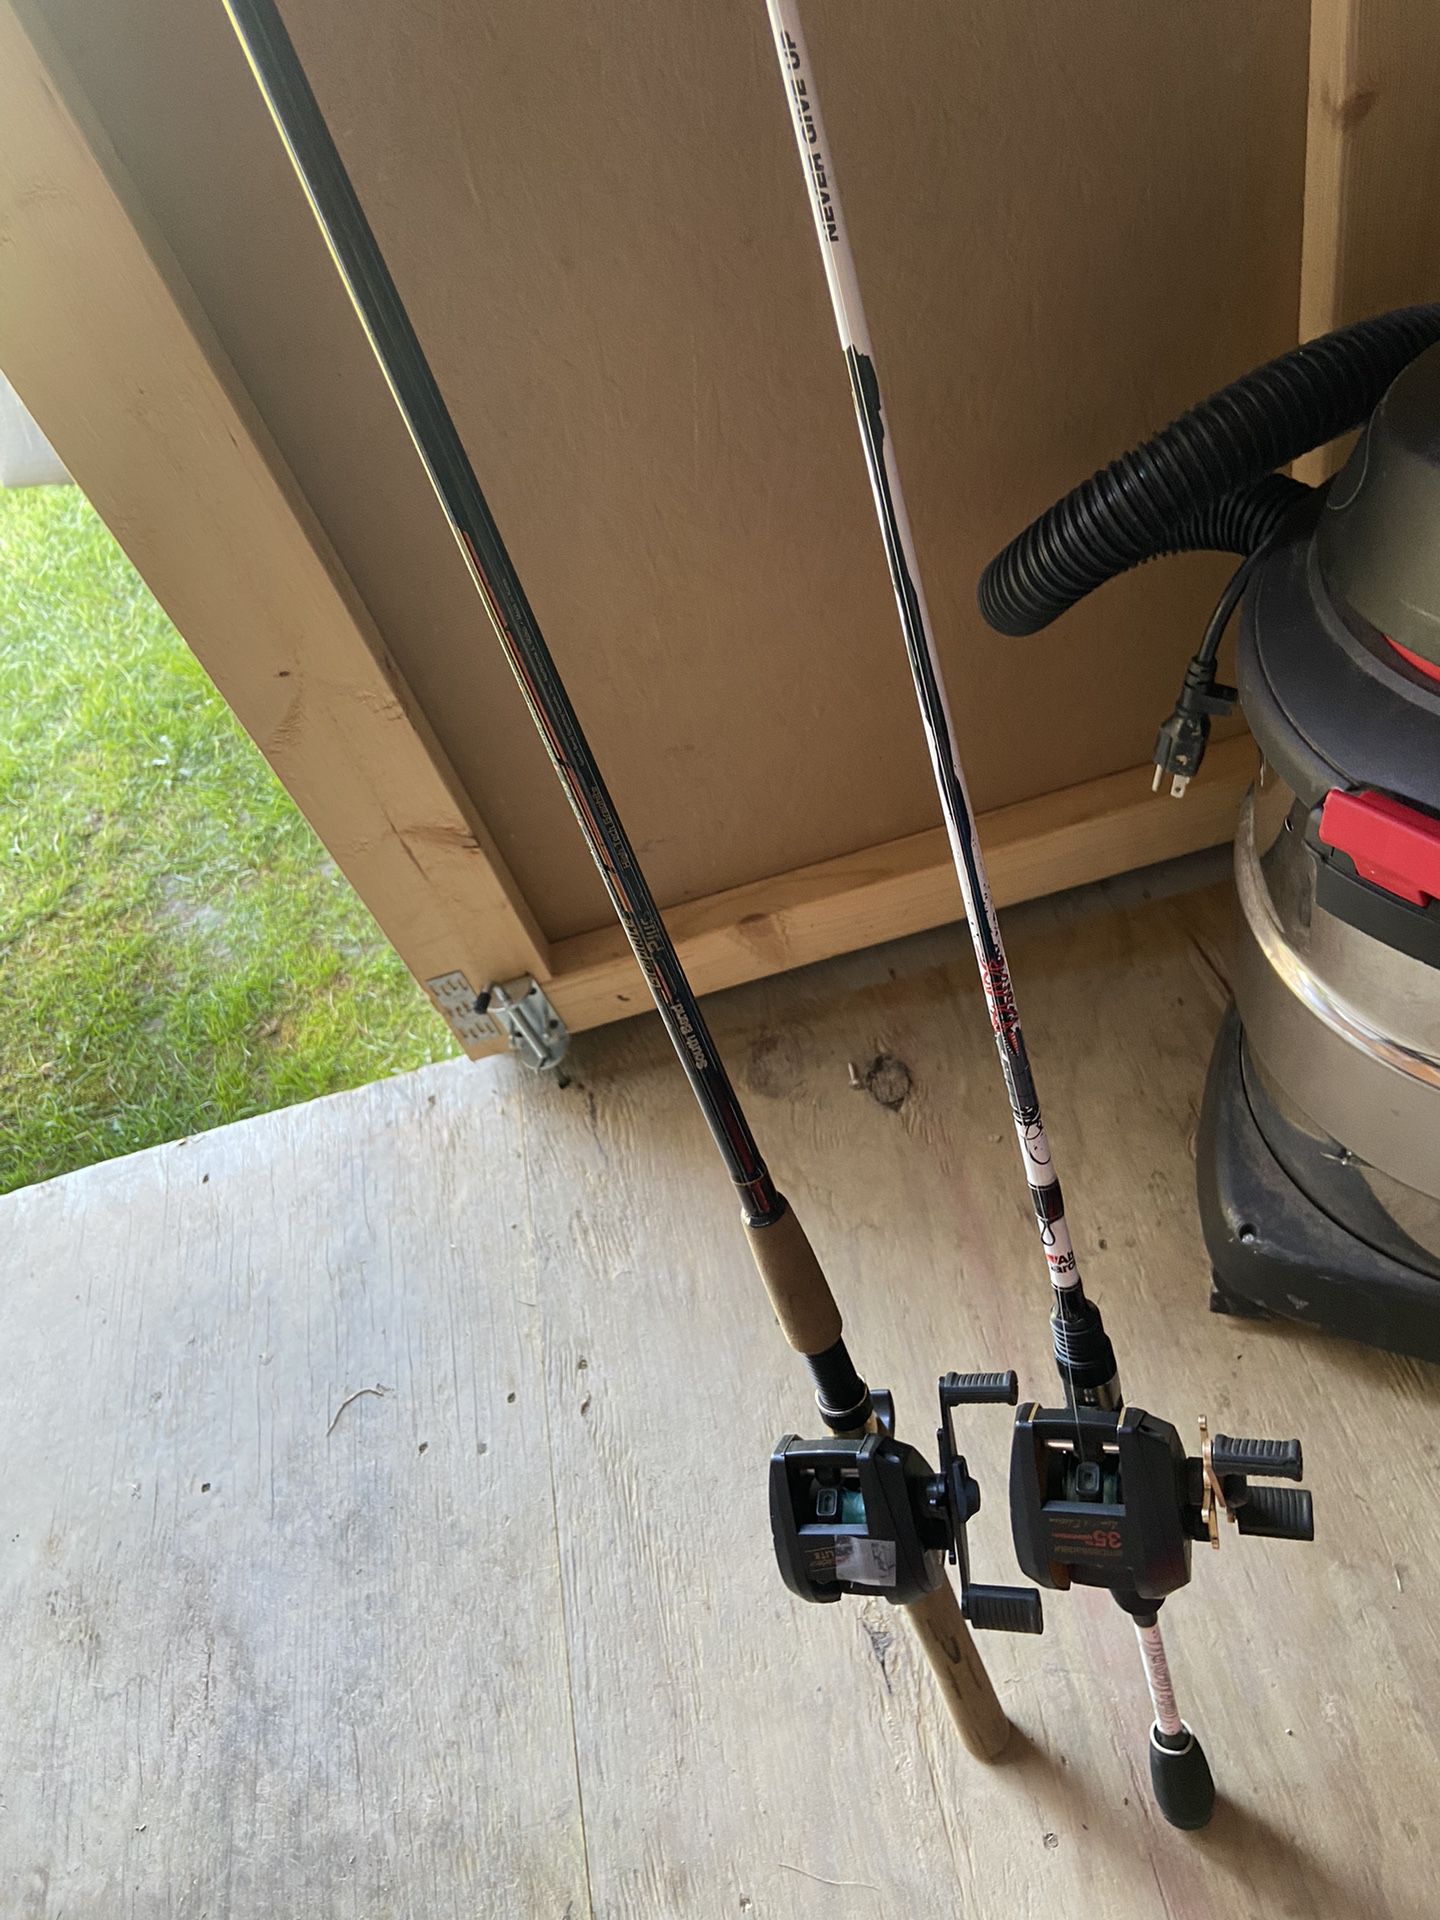 2 Baitcaster Fishing Reels And Rods